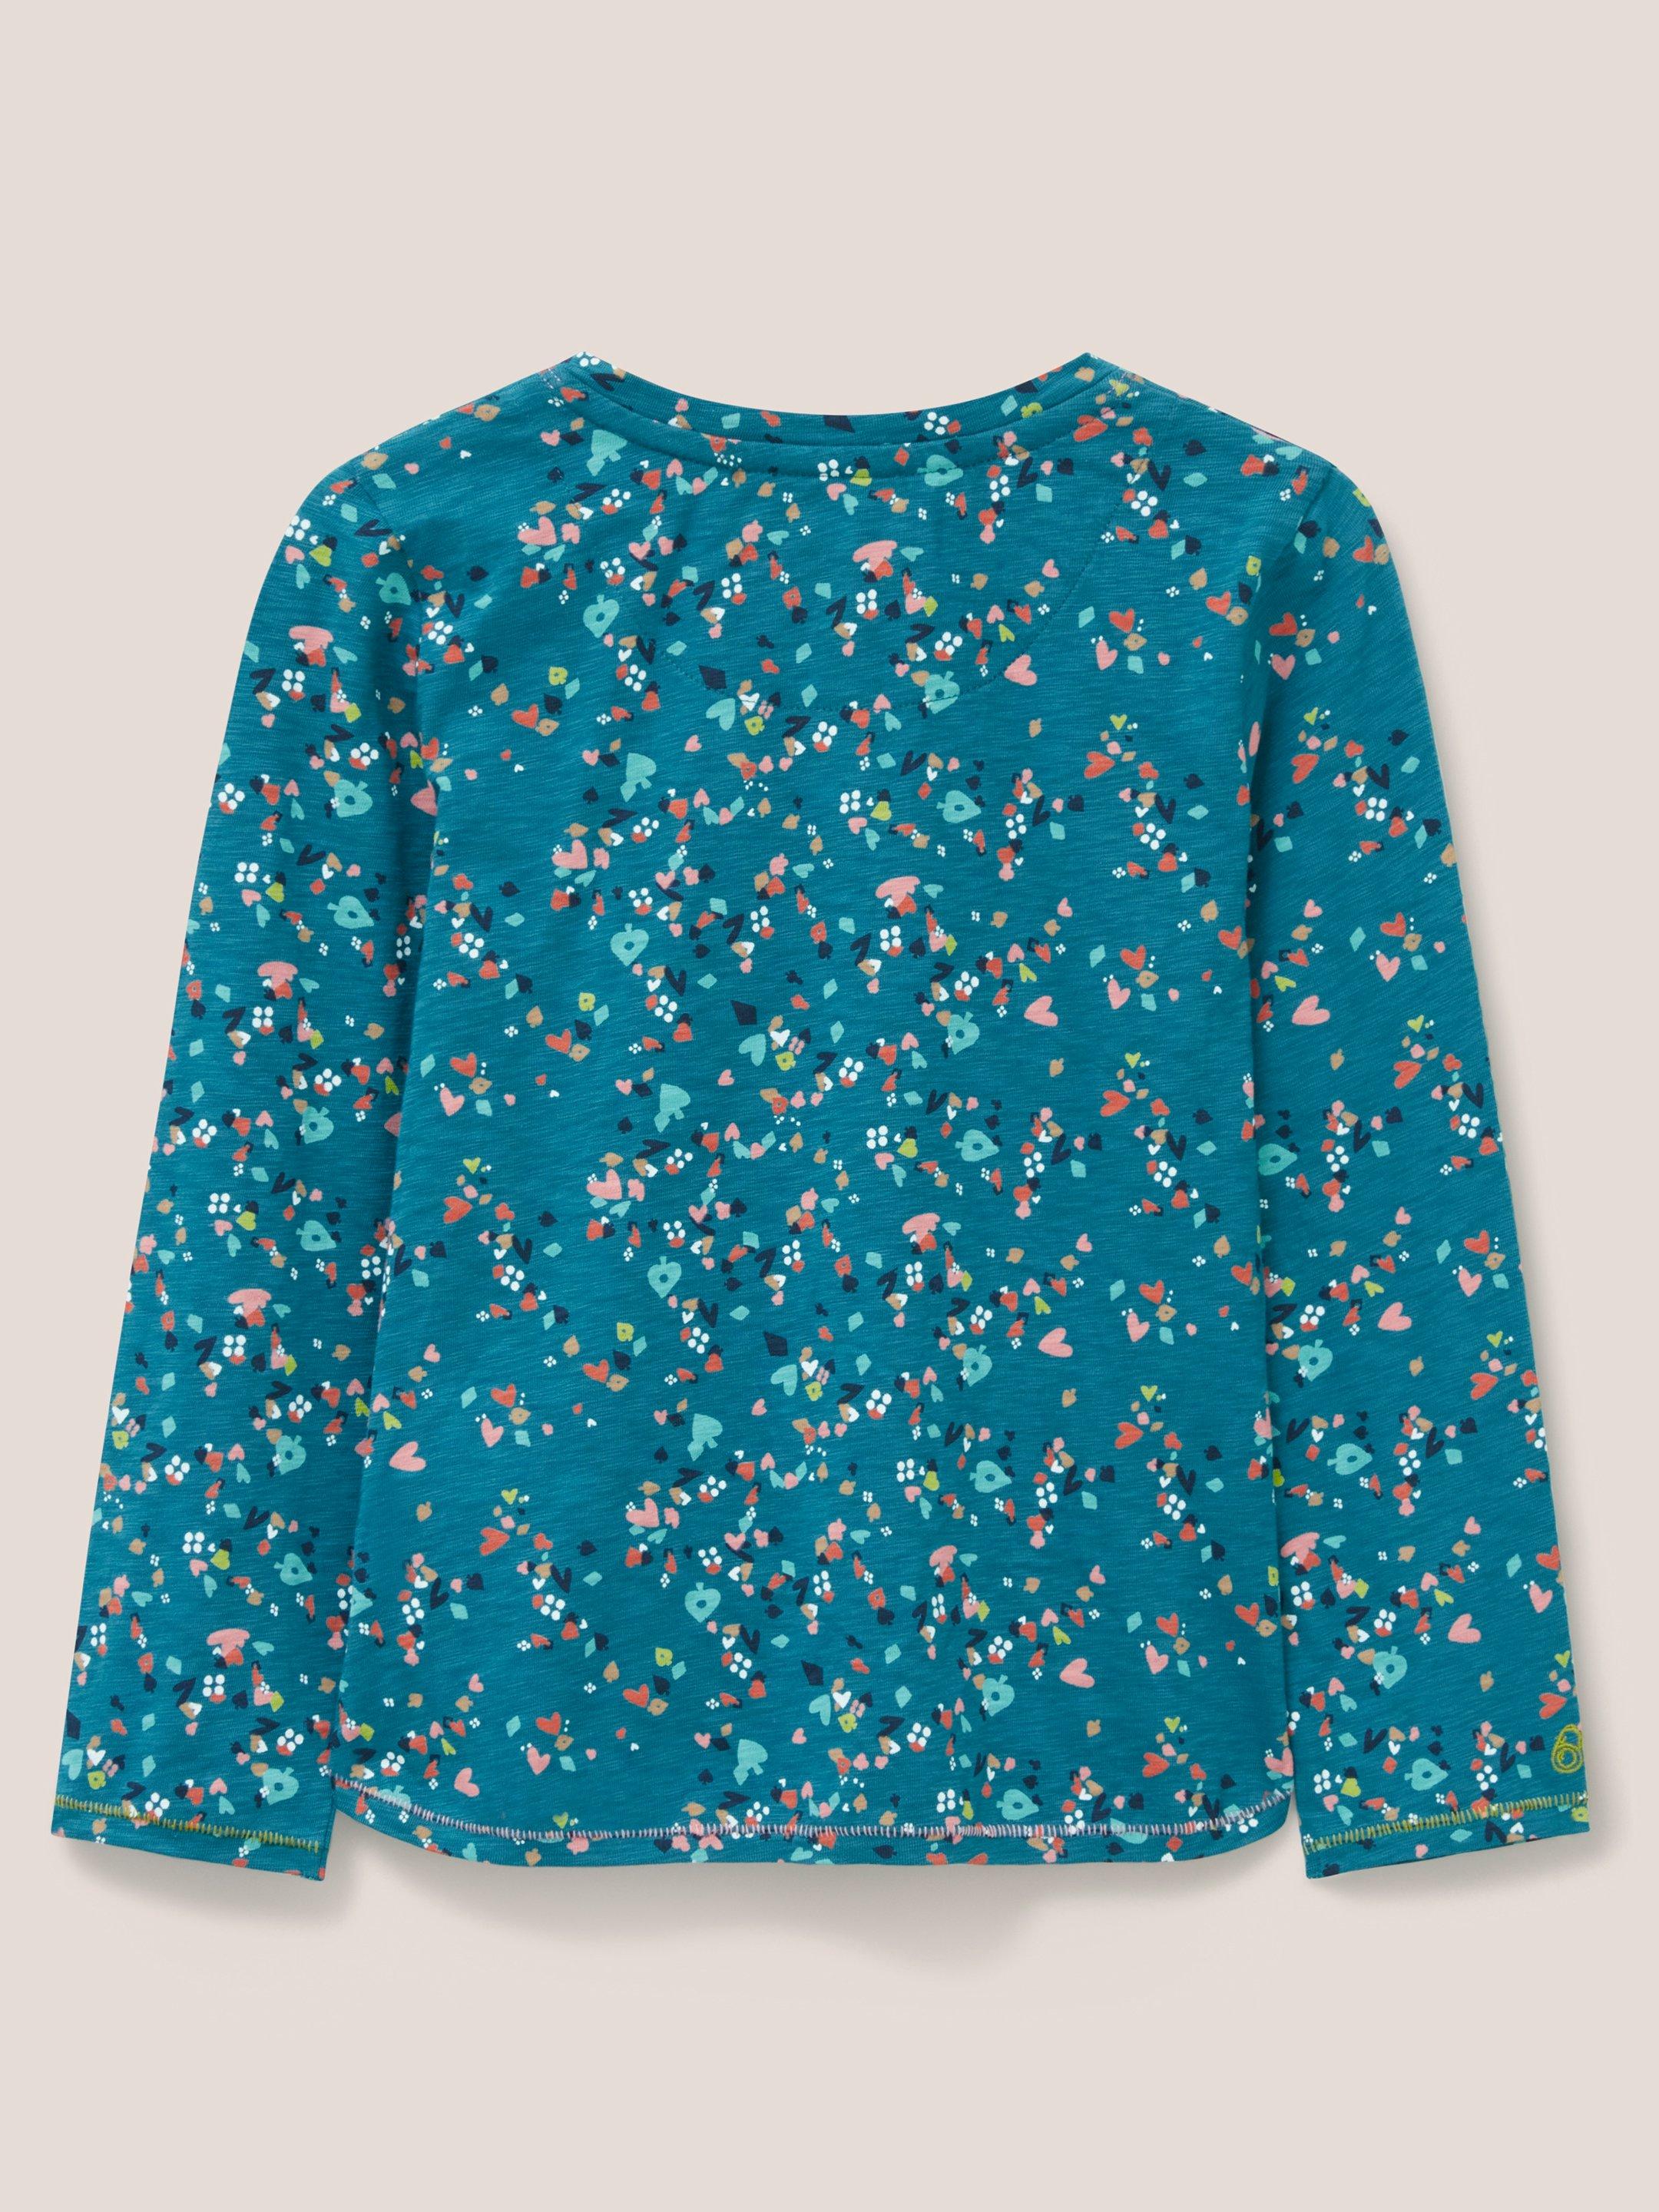 Dotty Printed Jersey Top in TEAL PR - FLAT BACK